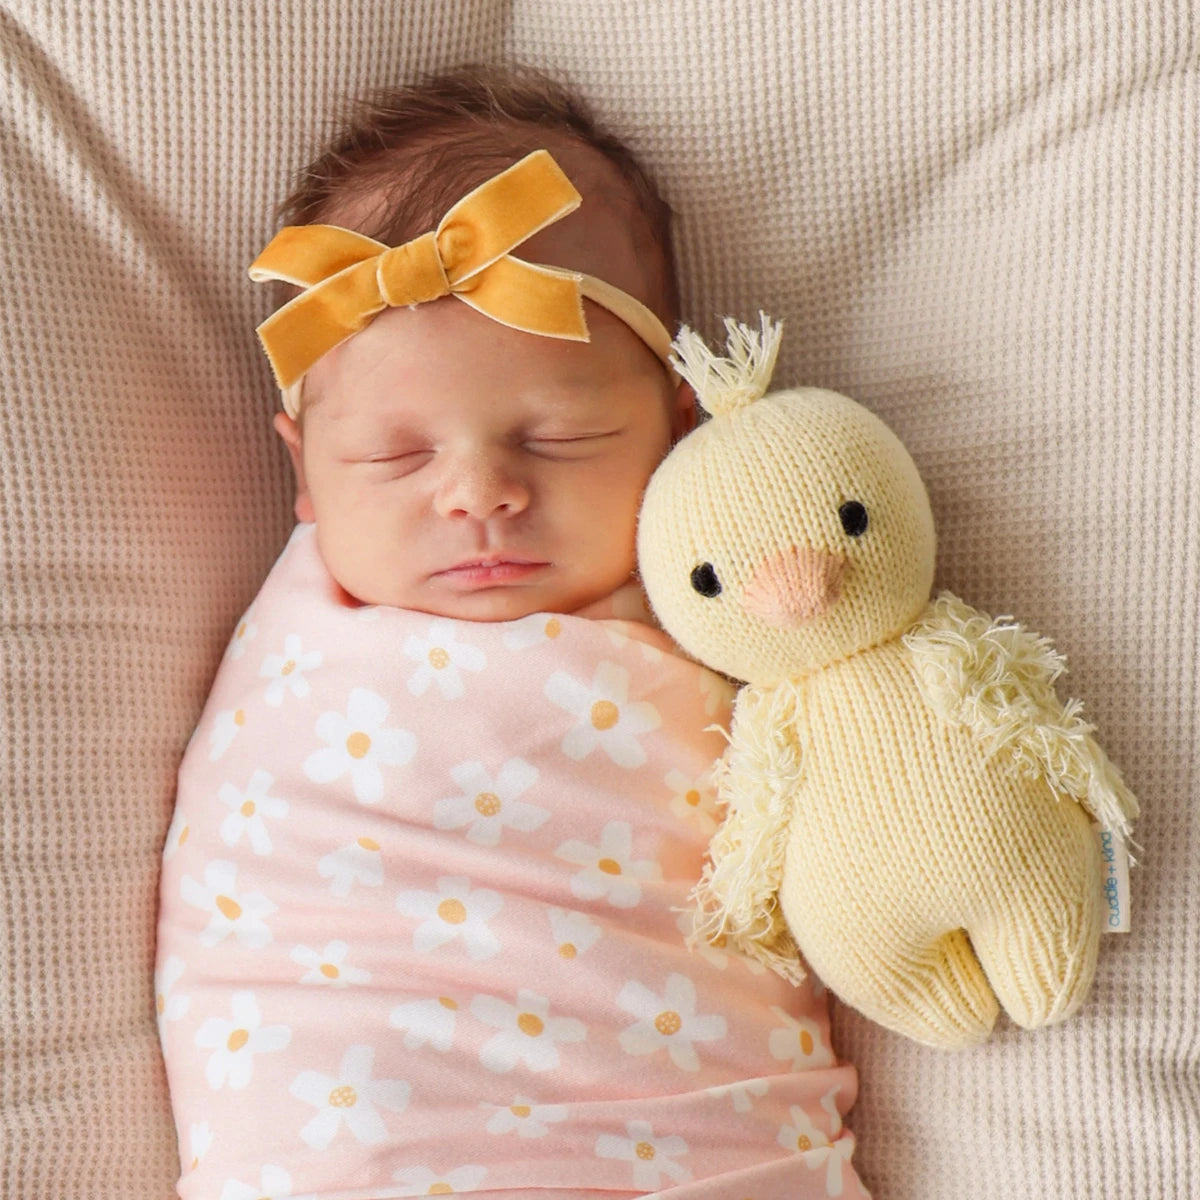 Baby Duckling - cuddle + kind Hand-Knit Baby Animals Lifestyle